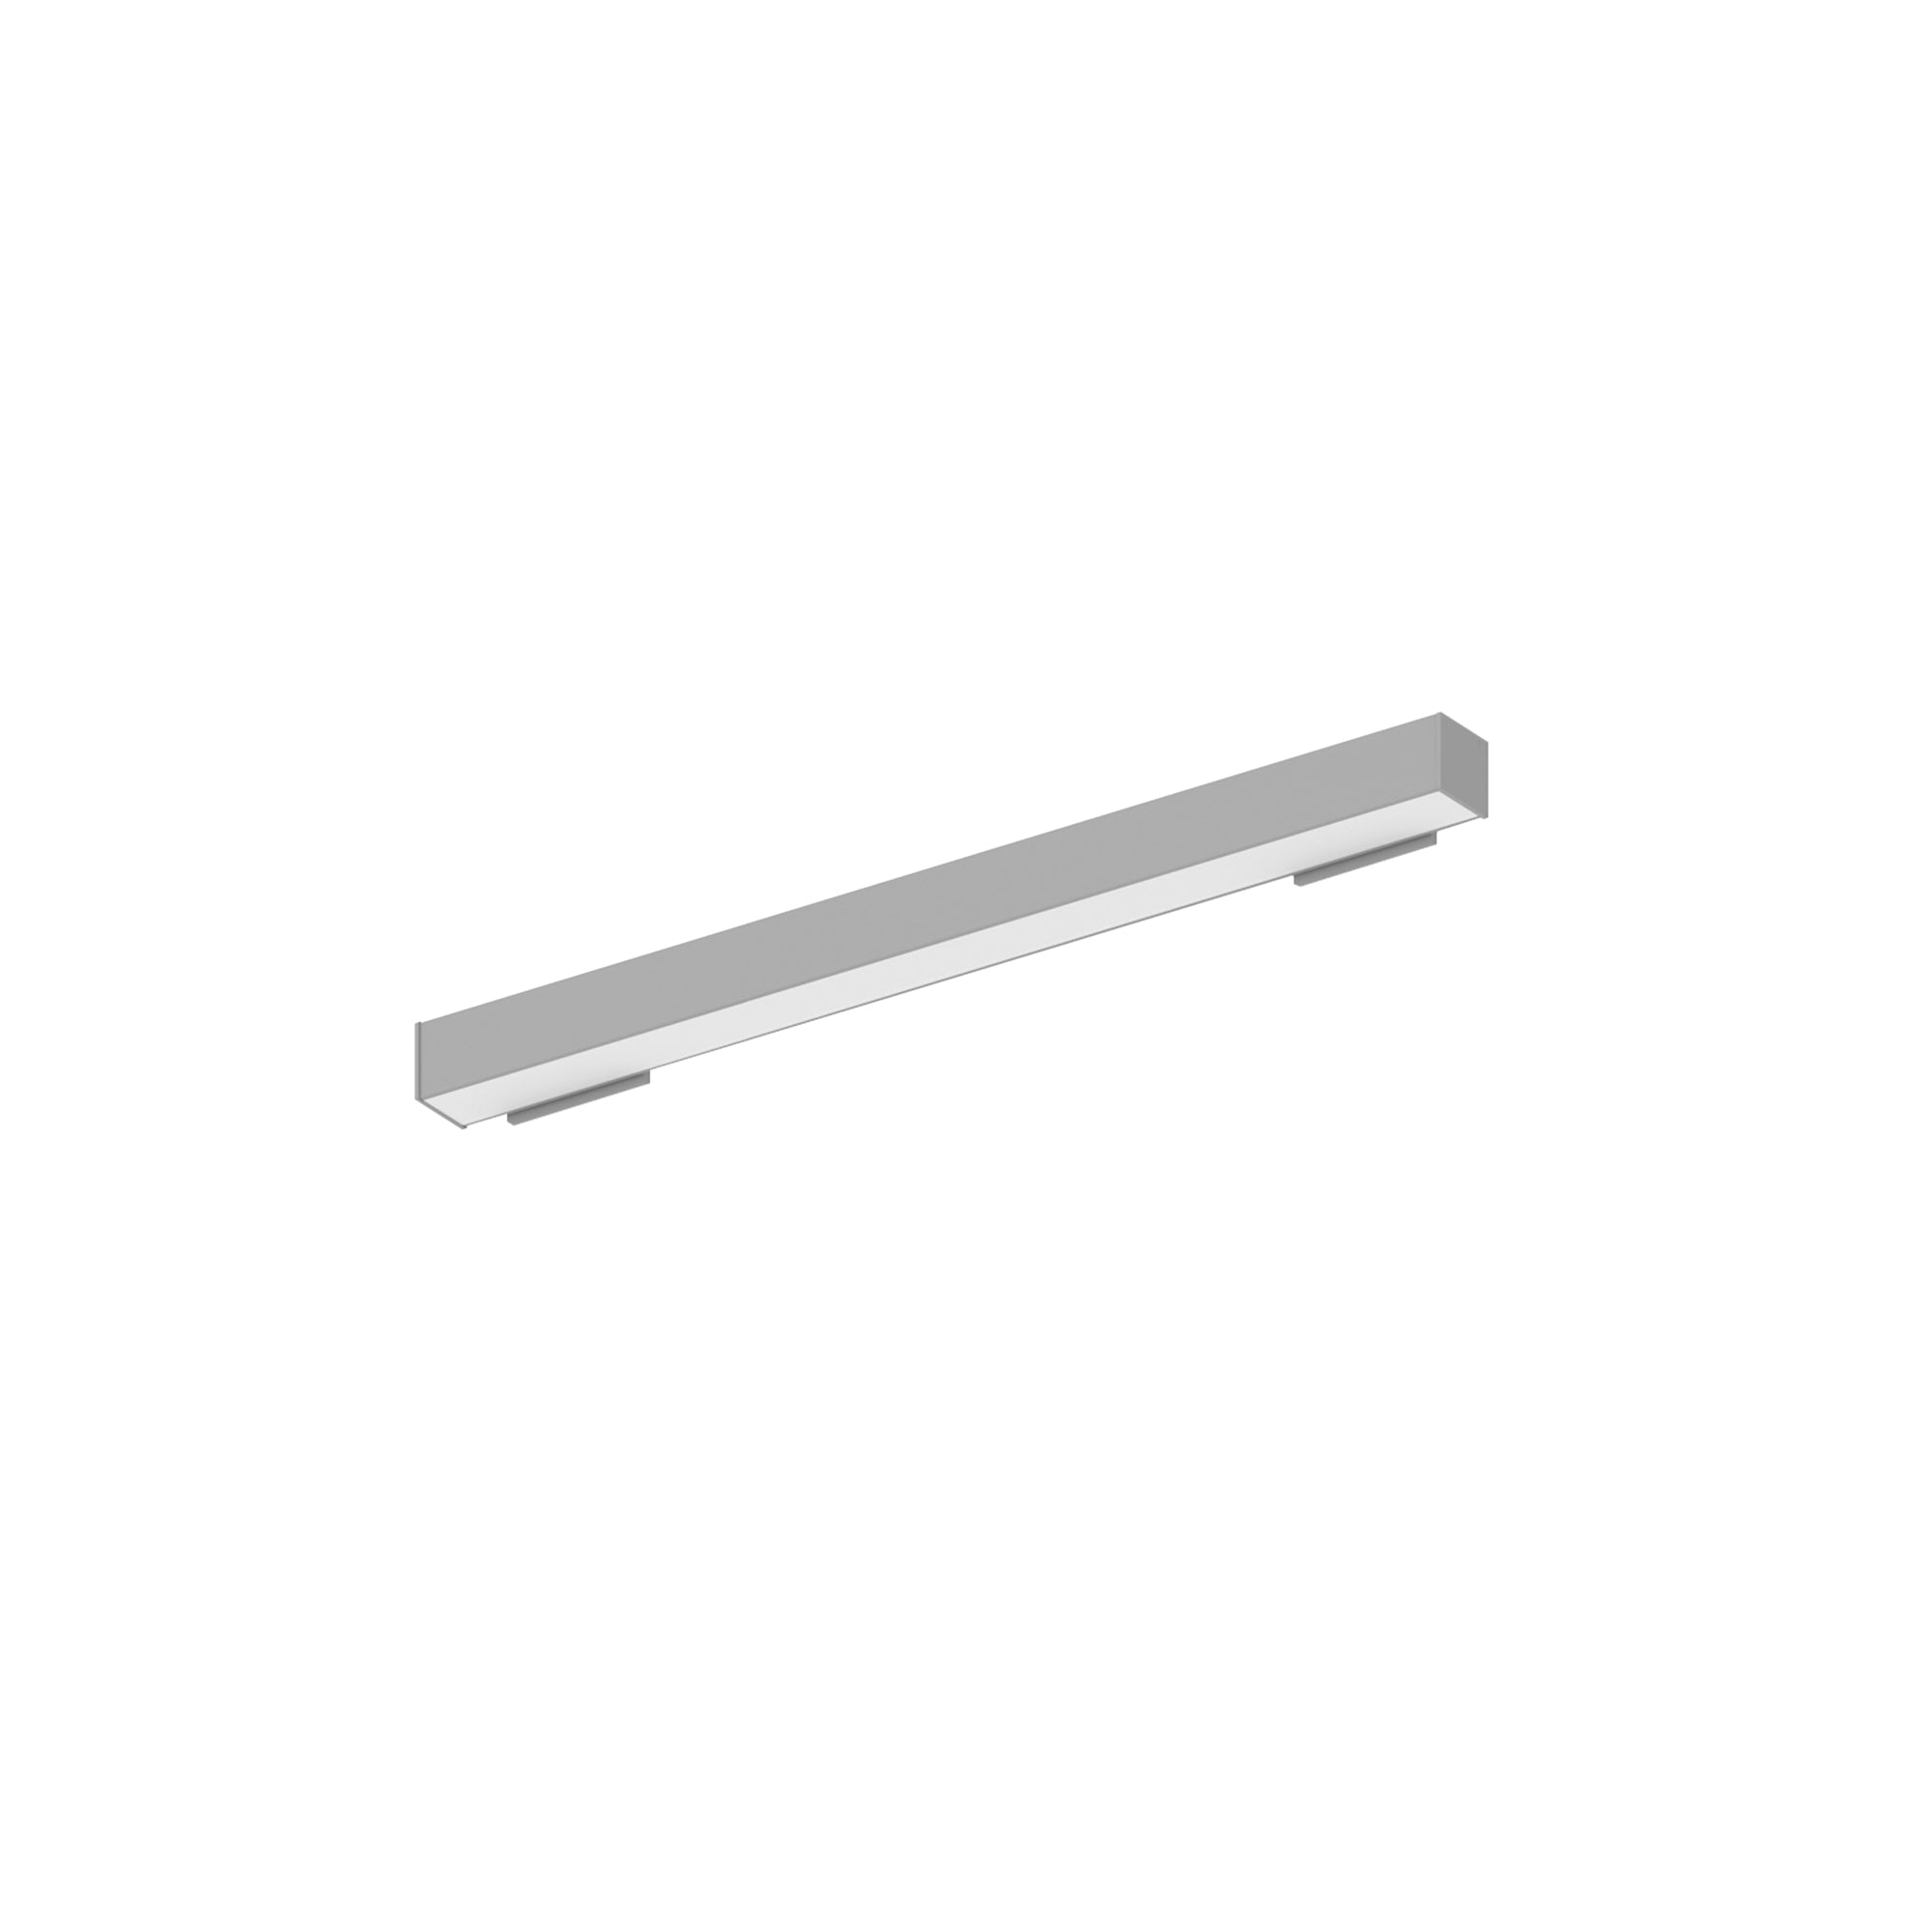 Nora Lighting NWLIN-21035A/L2-R2P - Linear - 2' L-Line LED Wall Mount Linear, 2100lm / 3500K, 2 Inchx4 Inch Left Plate & 2 Inchx4 Inch Right Plate, Right Power Feed, Aluminum Finish